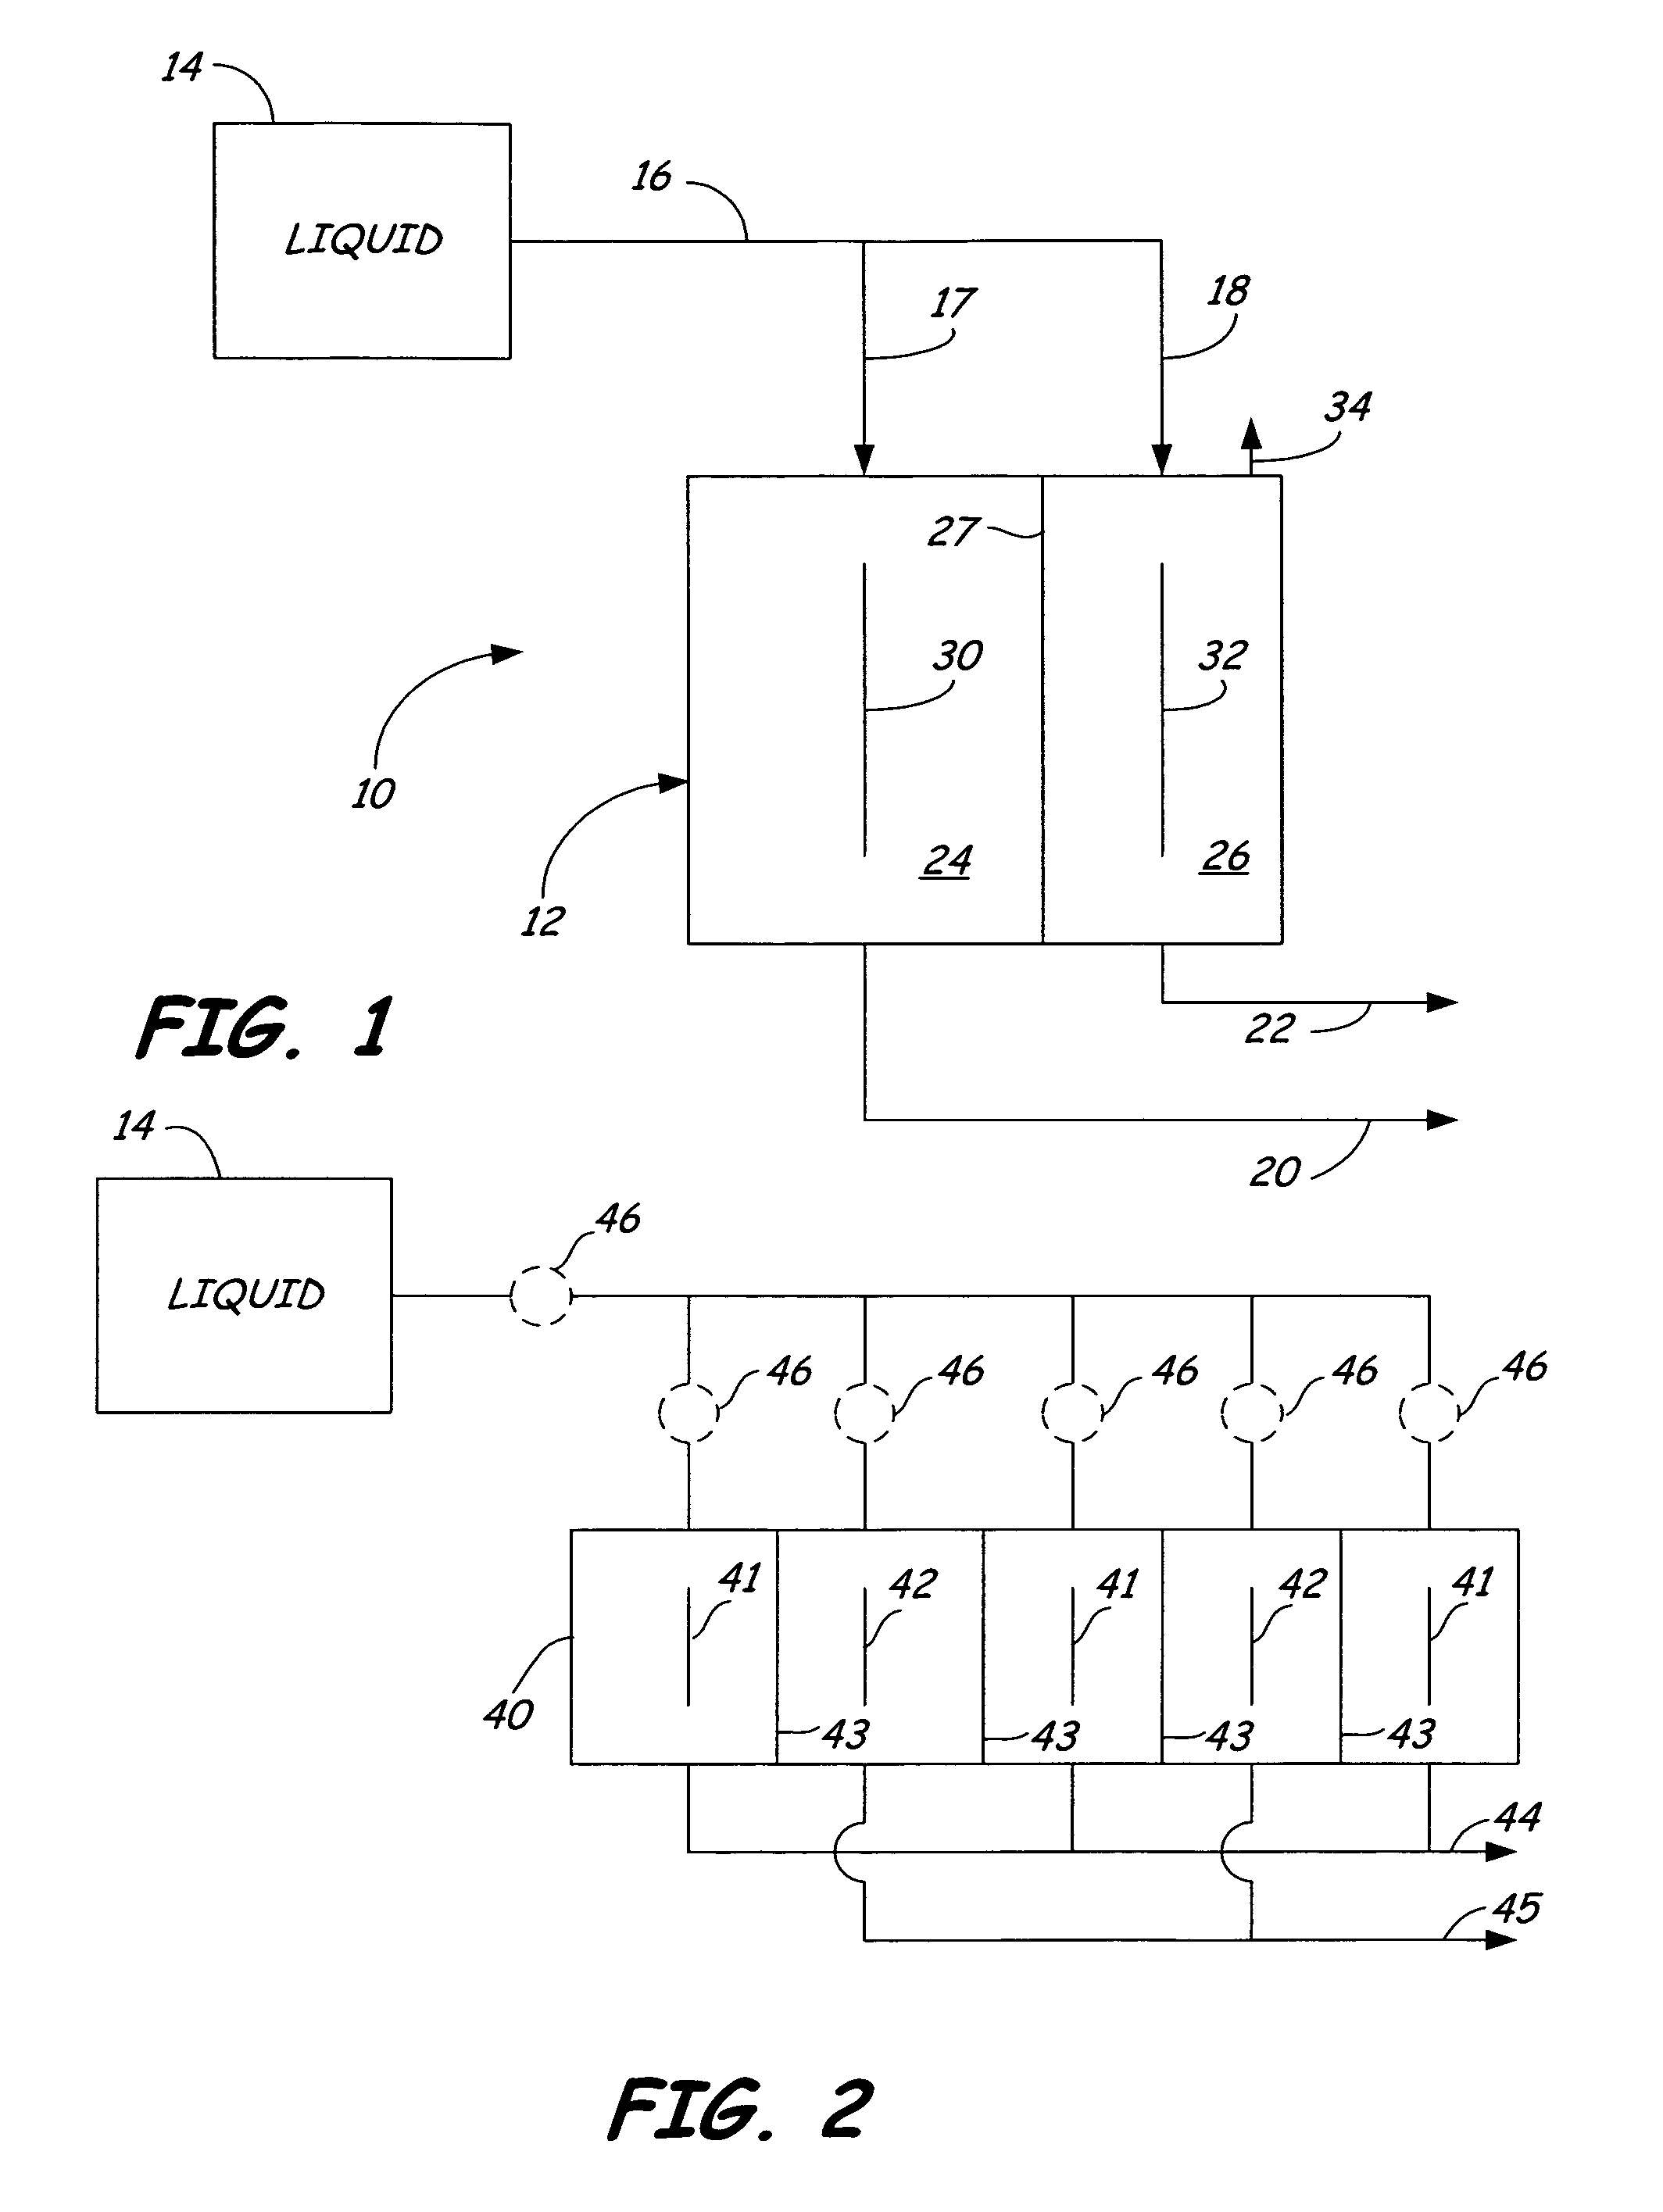 Apparatus for generating sparged, electrochemically activated liquid